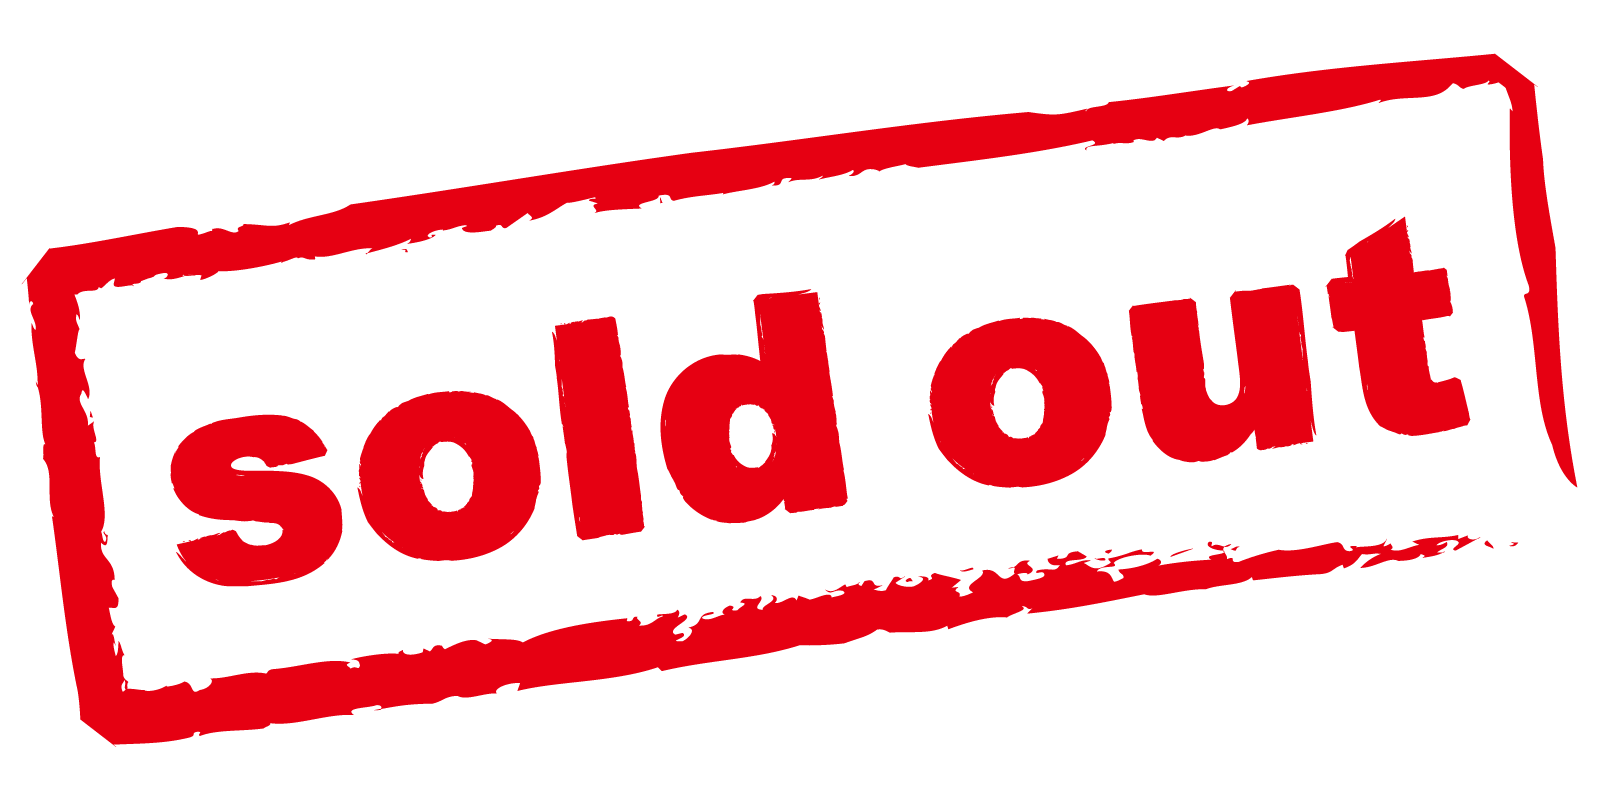 Sold out 2. Печать sold out. Sold out без фона. Солд аут на прозрачном фоне. Sold out для фотошопа.